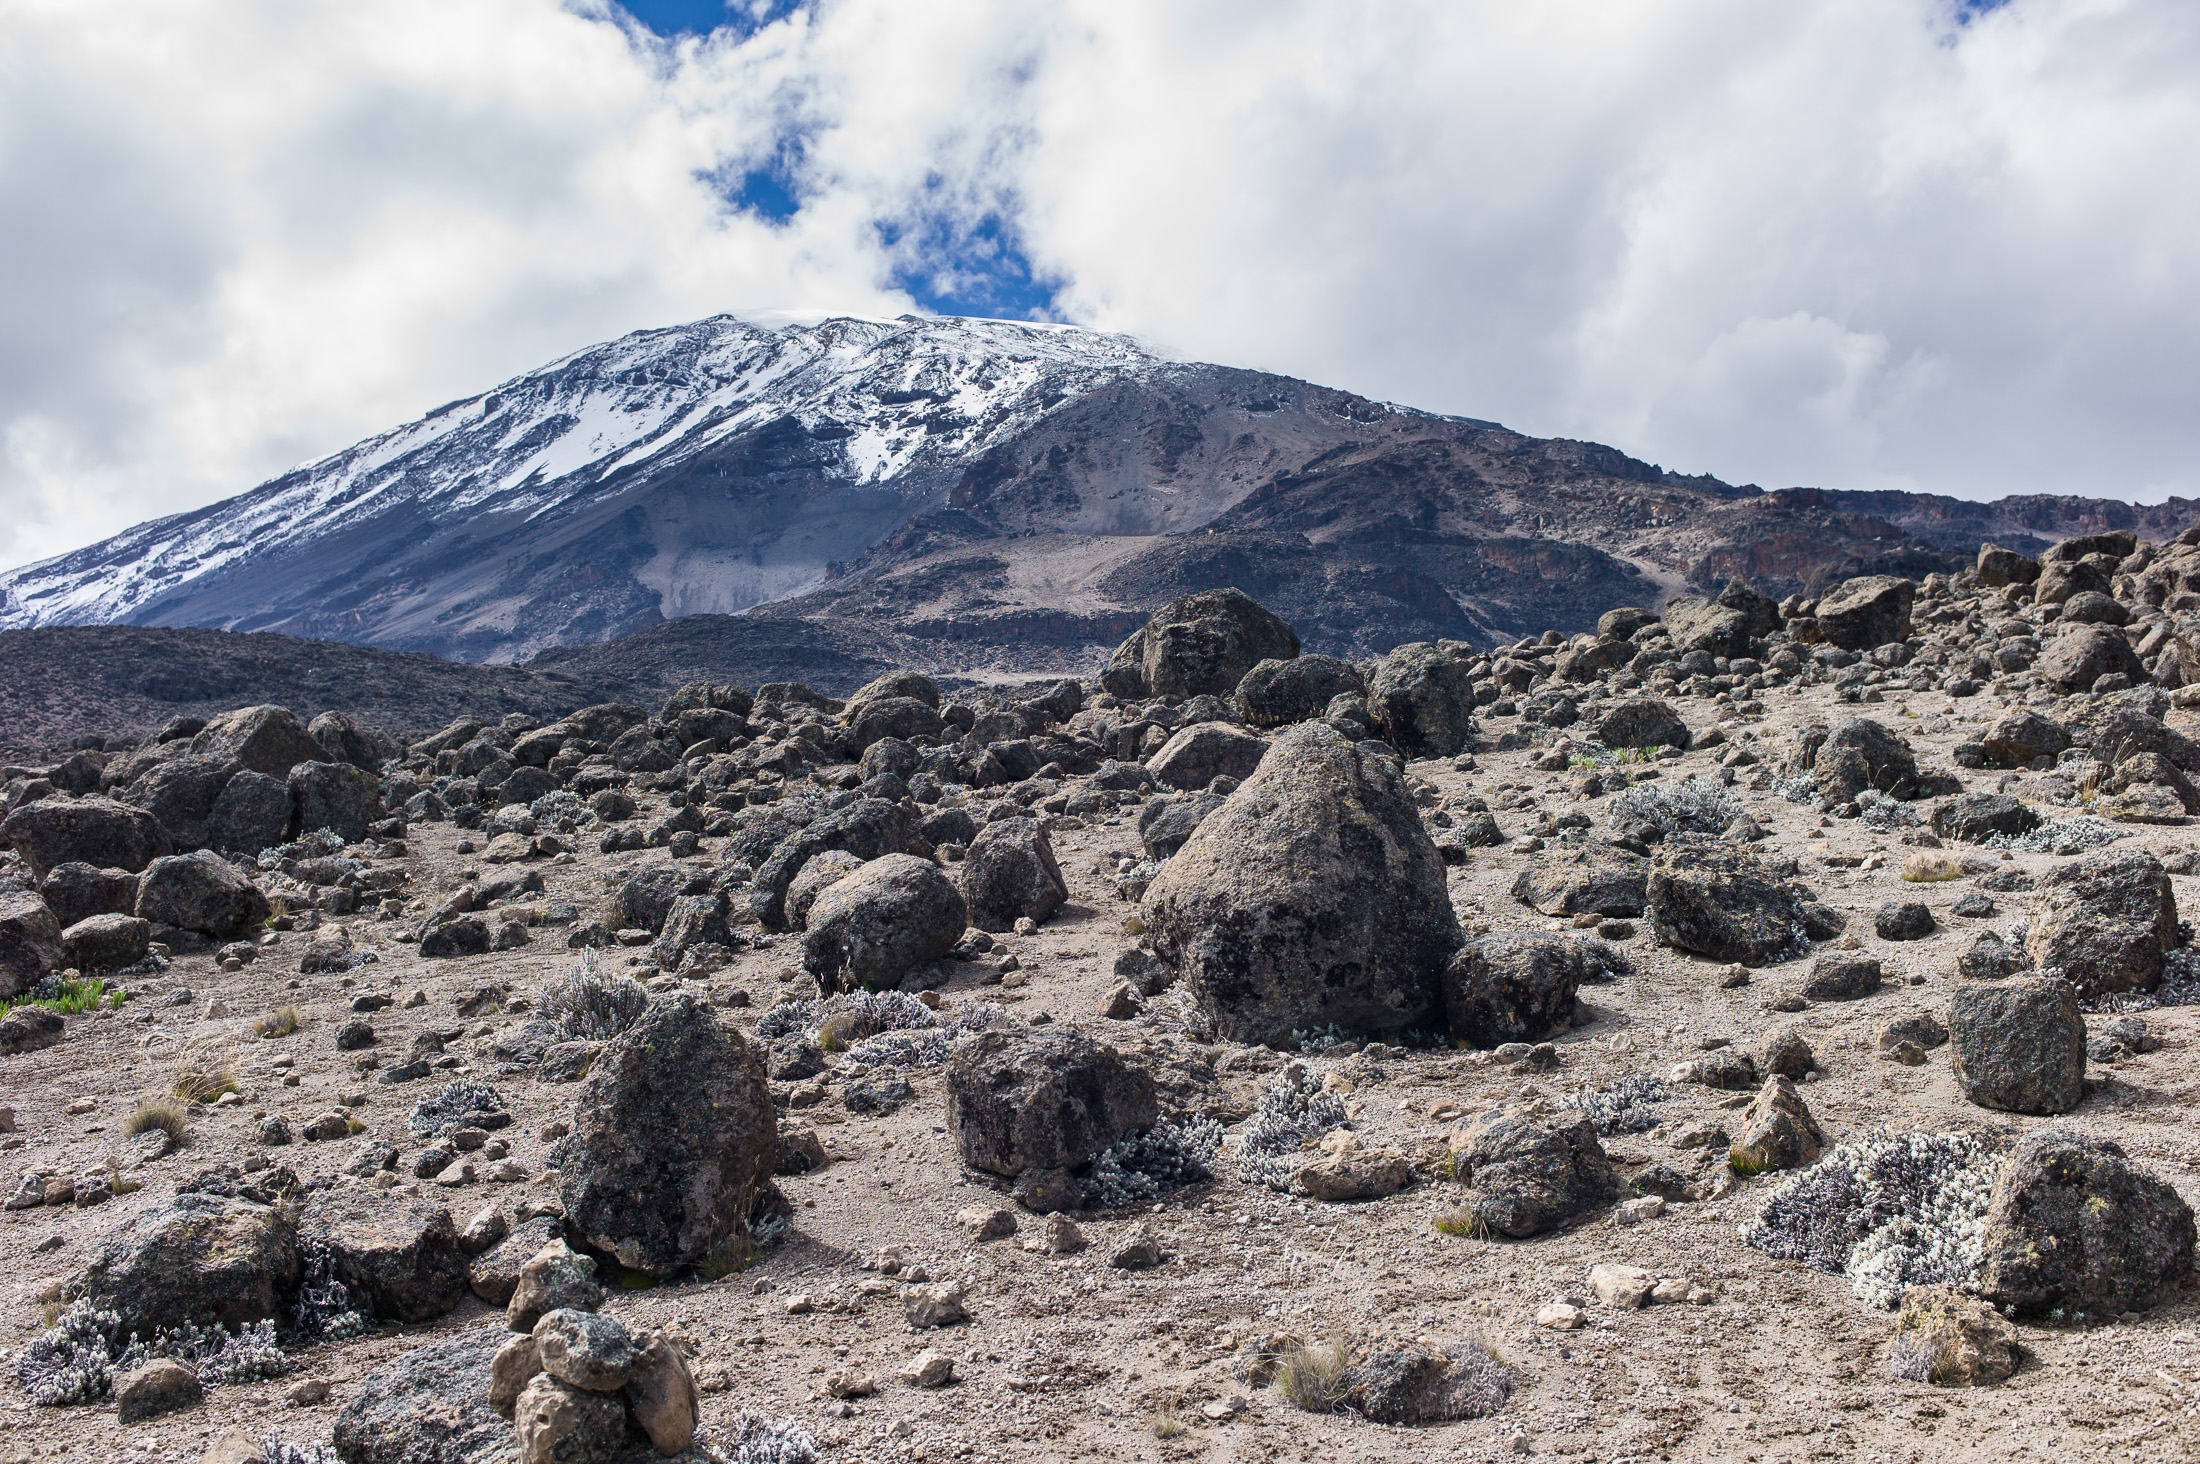 Summit of Mount Kilimanjaro seen from the Northern Circuit